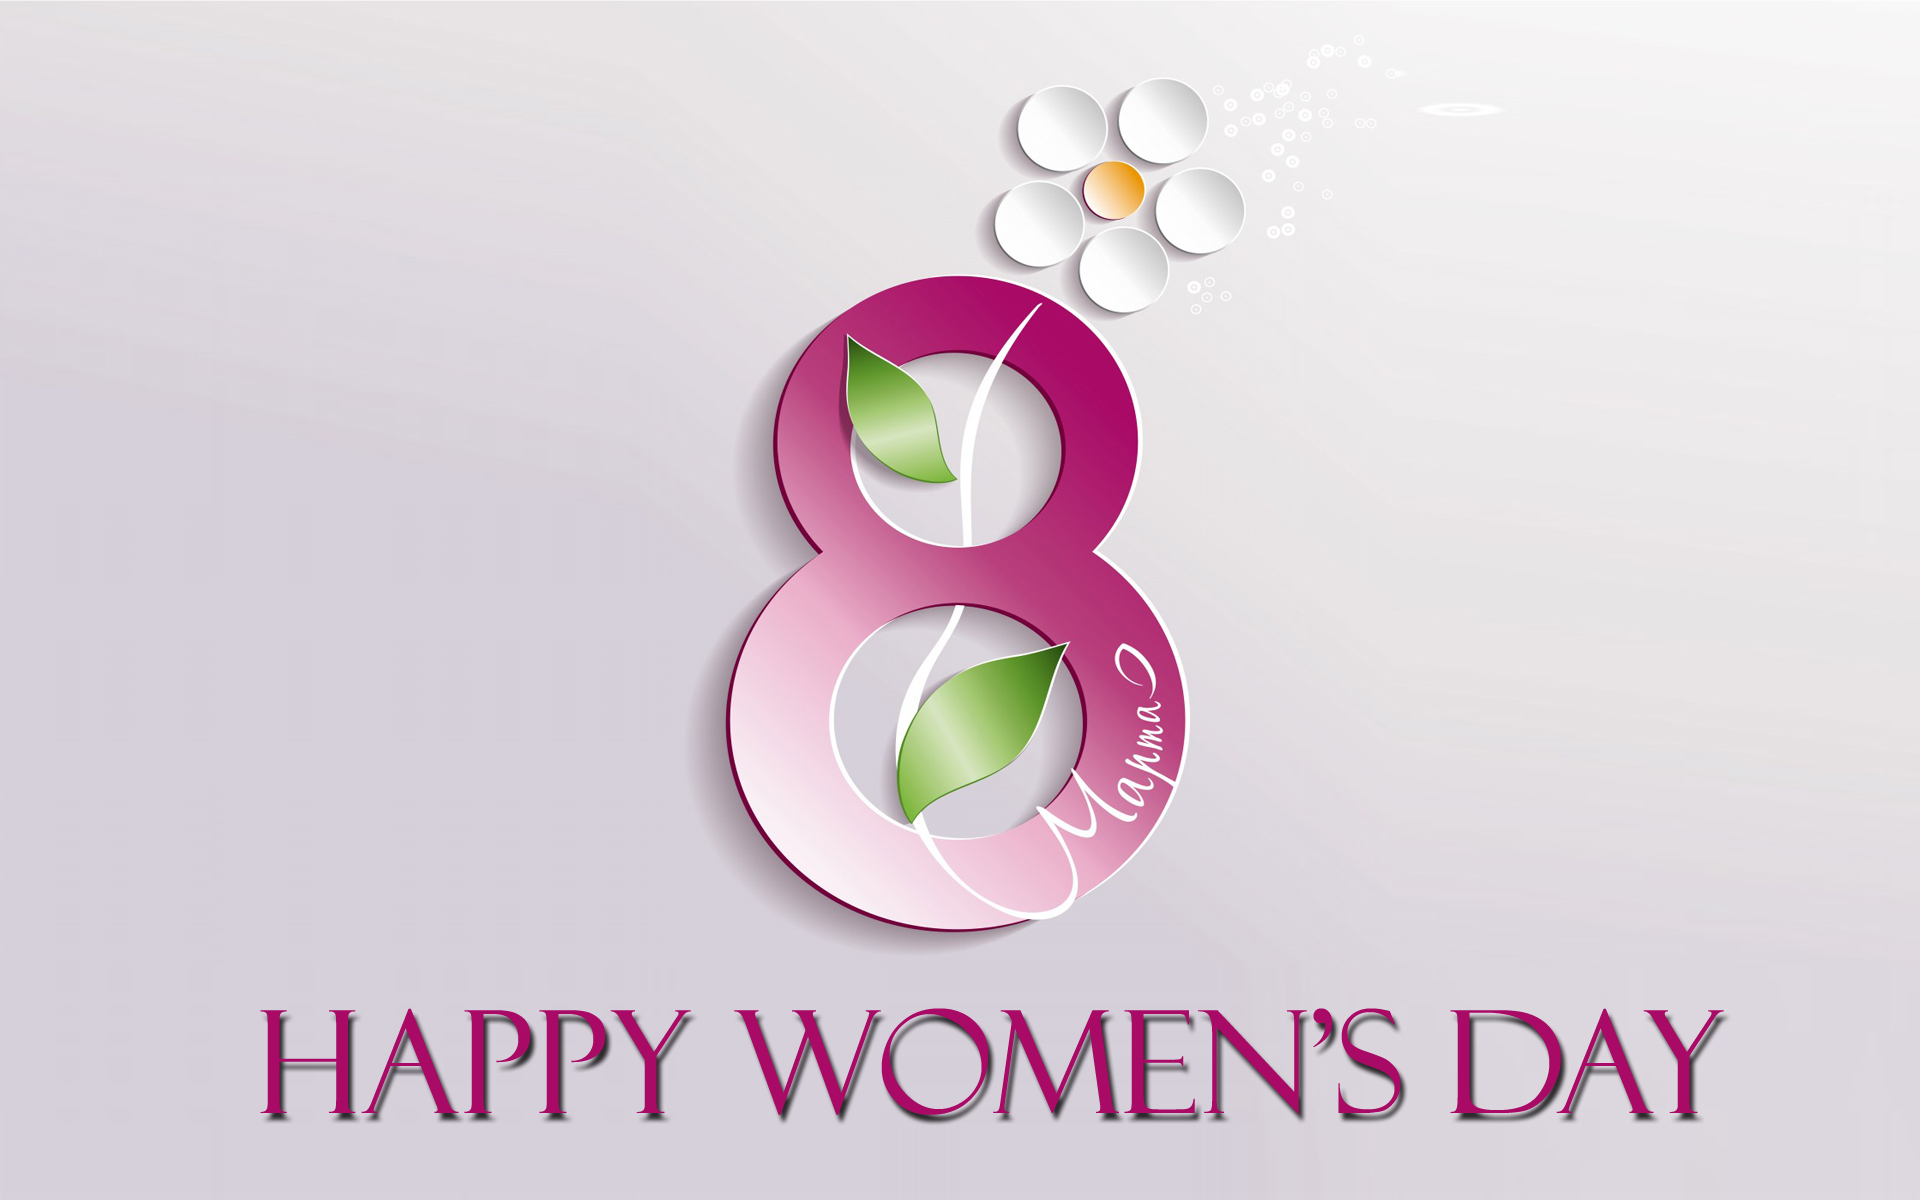 Happy Womens Day Hd Images, Wallpapers, Pics -free - World Women's Day 2019 - HD Wallpaper 